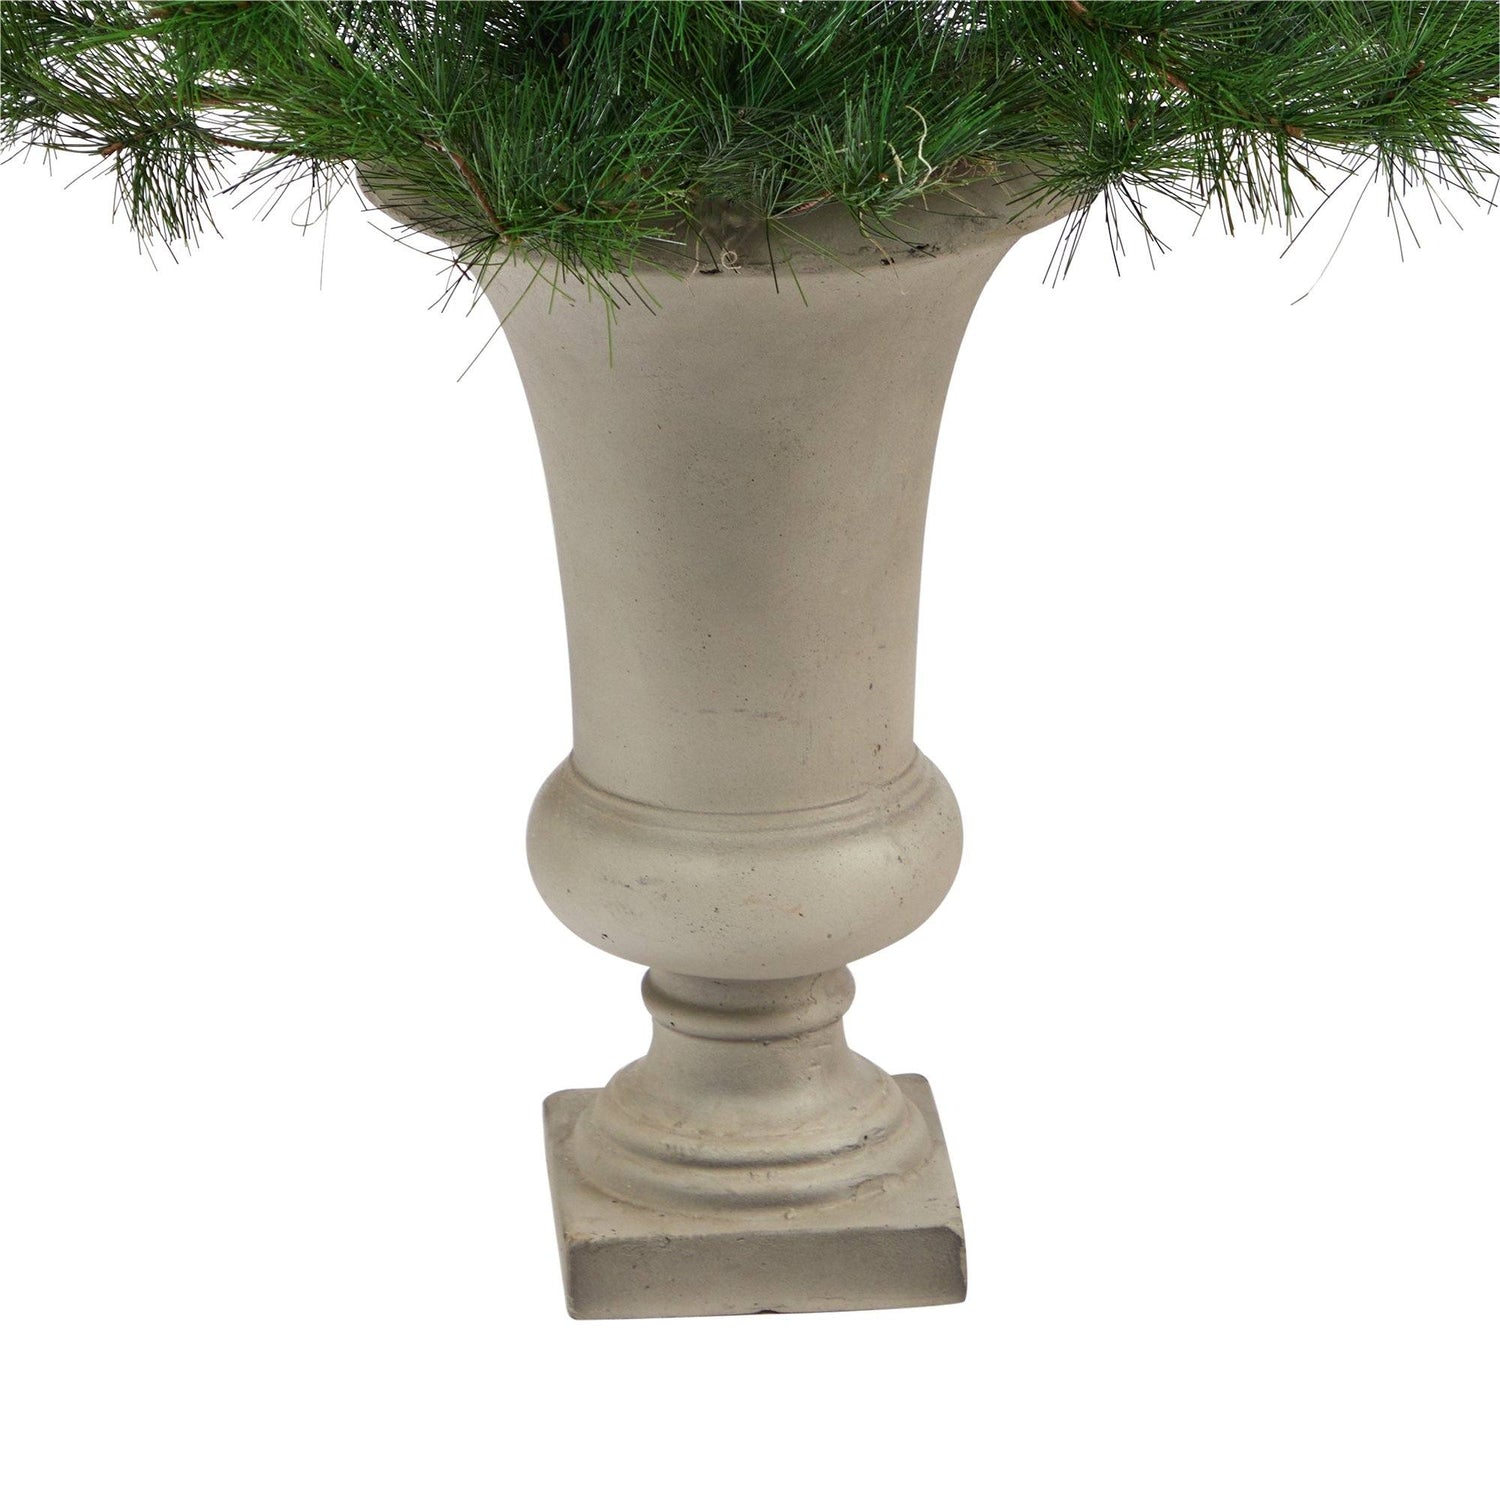 3.5’ Yukon Mixed Pine Artificial Christmas Tree with 213 Bendable Branches in Sand Colored Urn